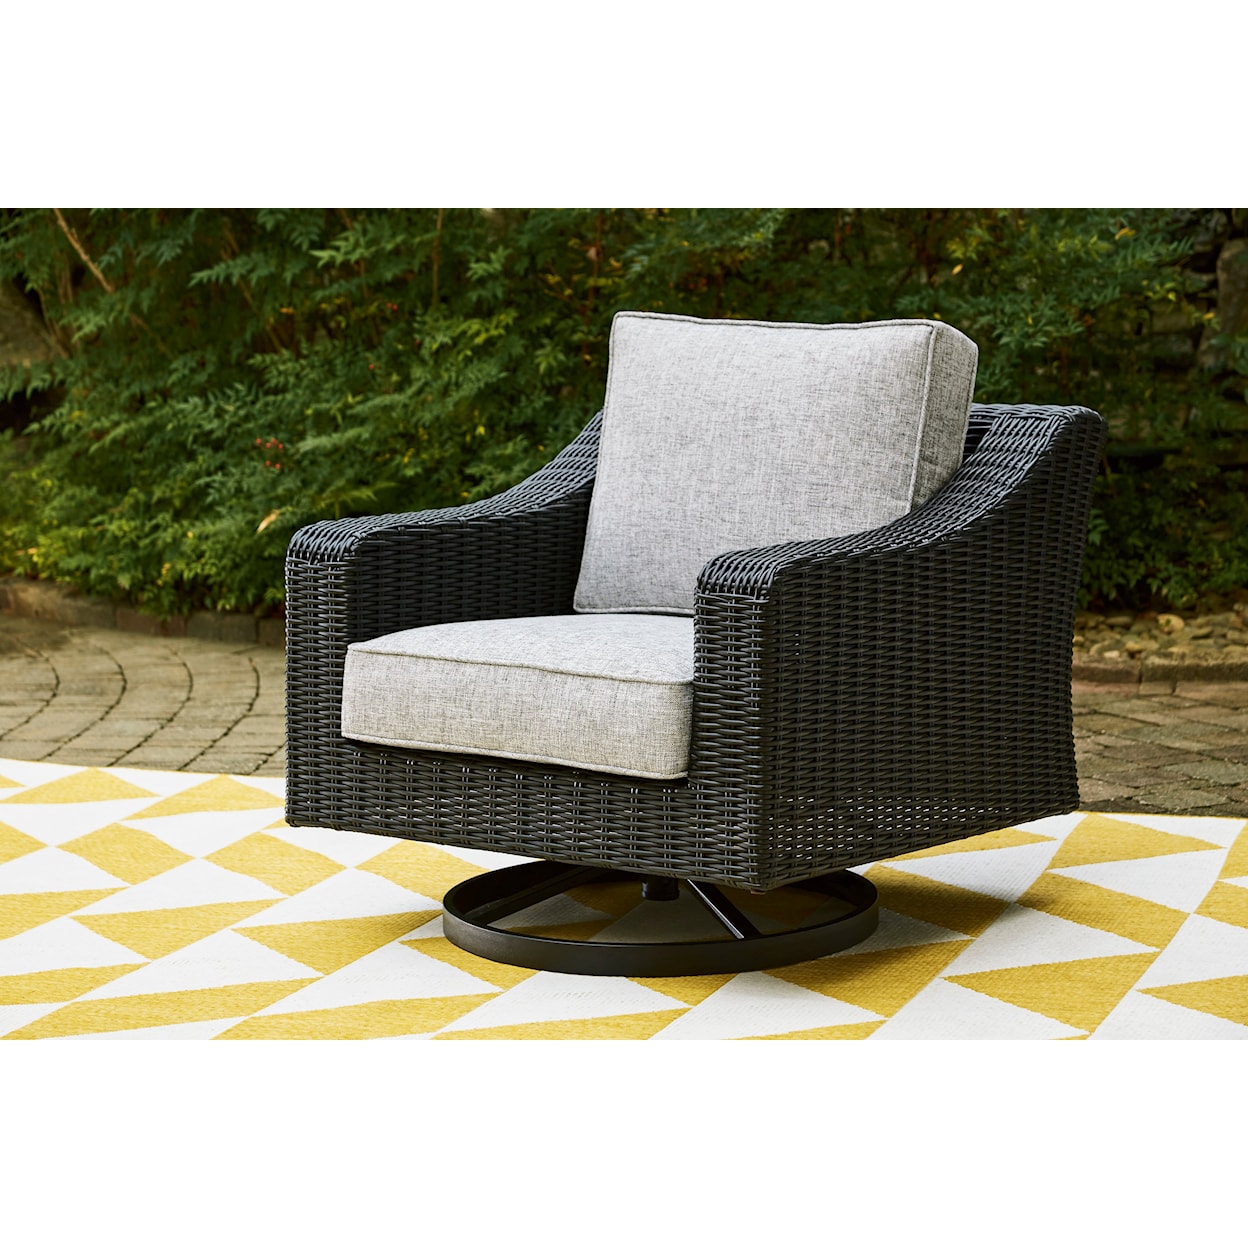 Signature Design by Ashley Beachcroft Outdoor Swivel Lounge With Cushion